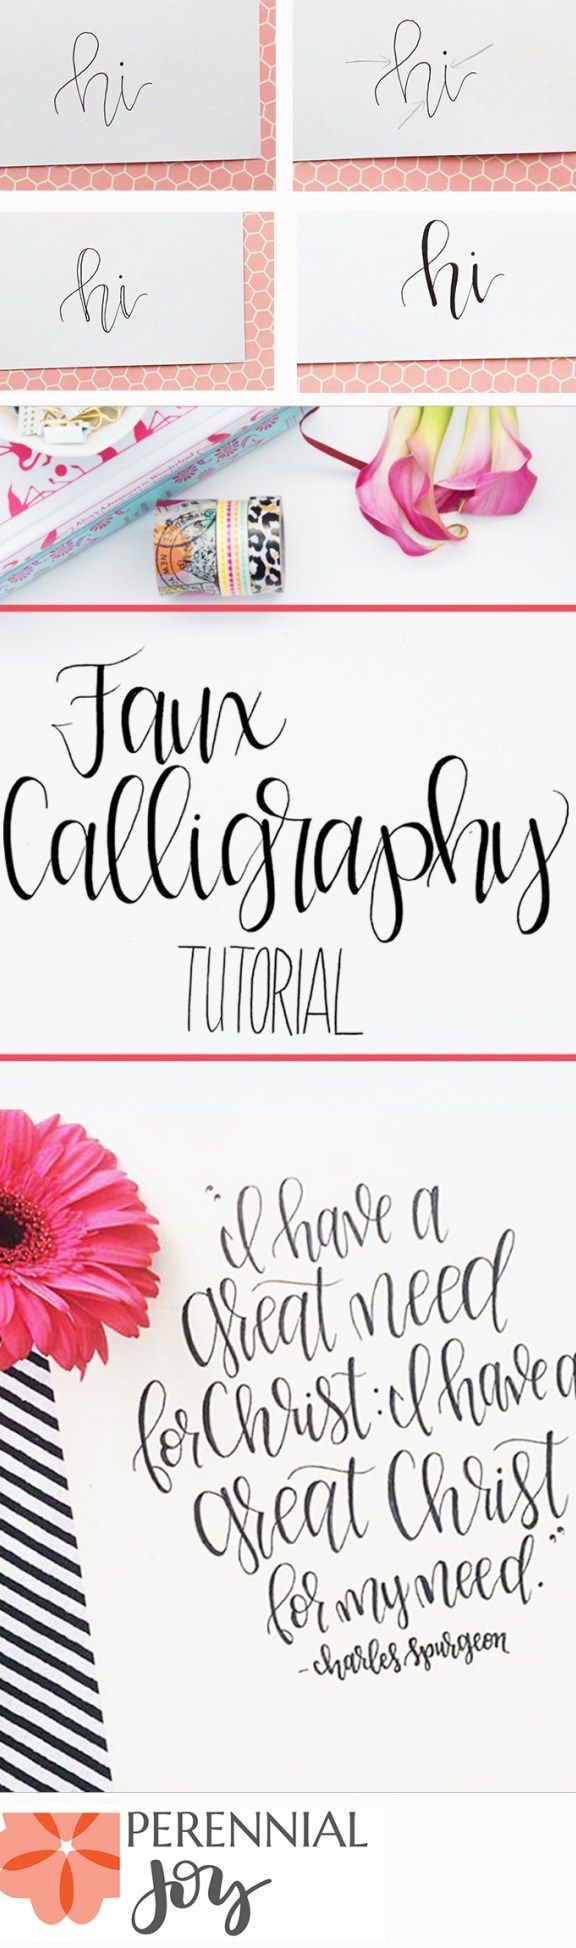 DIY Faux Calligraphy Tutorial: How to make modern calligraphy that looks amazing! Perennialjoy.com